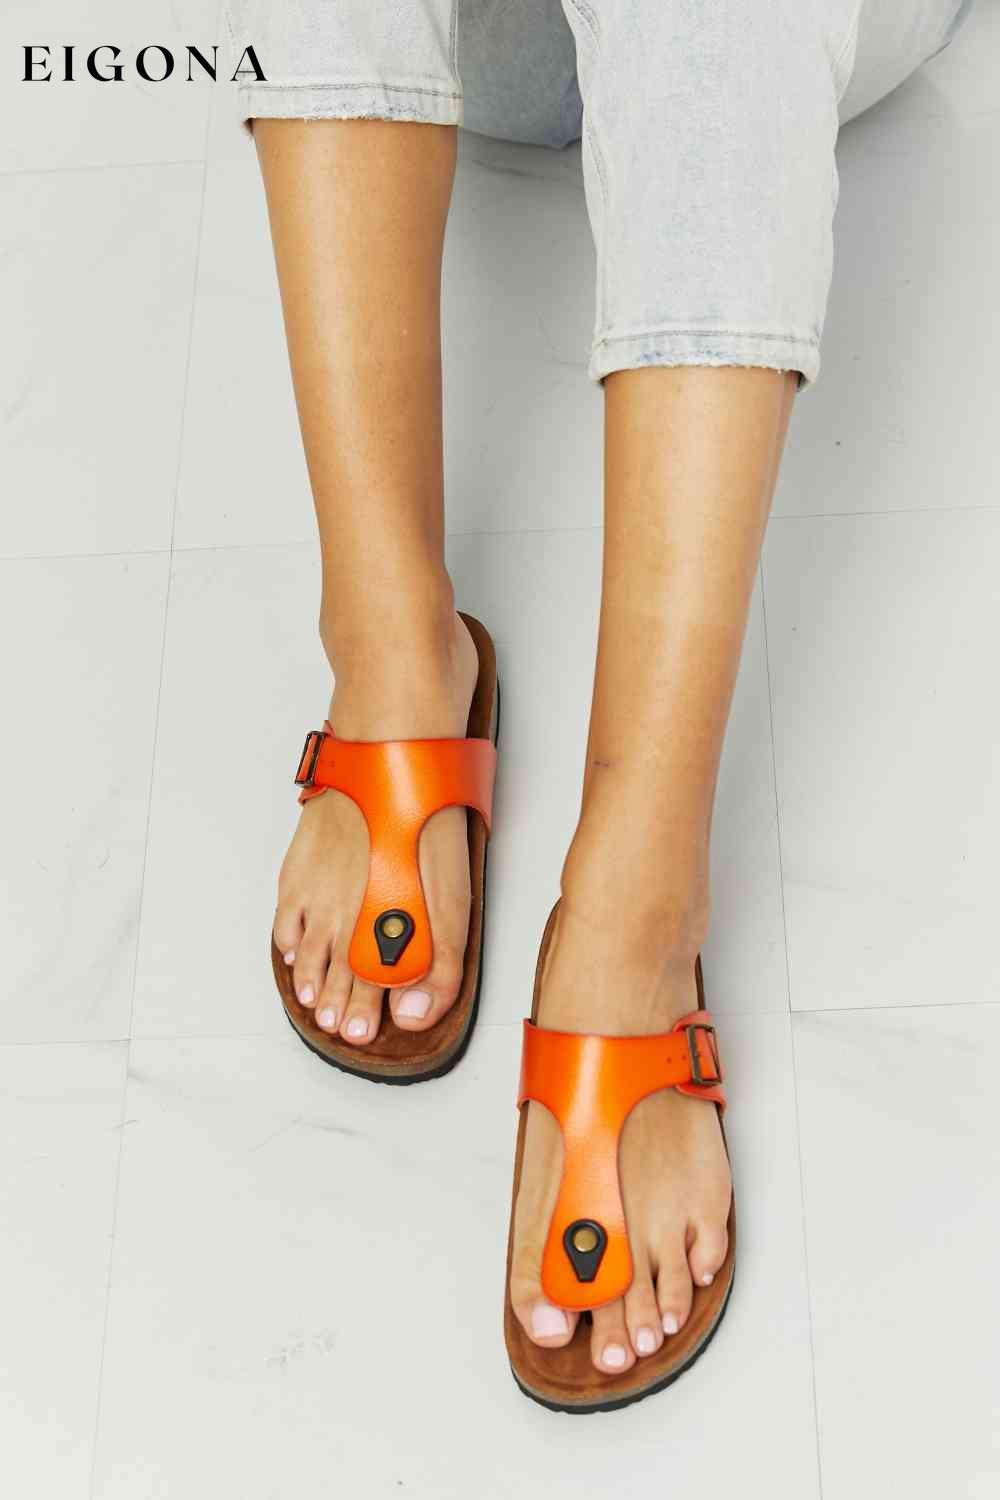 Drift Away T-Strap Flip-Flop in Orange Melody Ship from USA shoes womens shoes